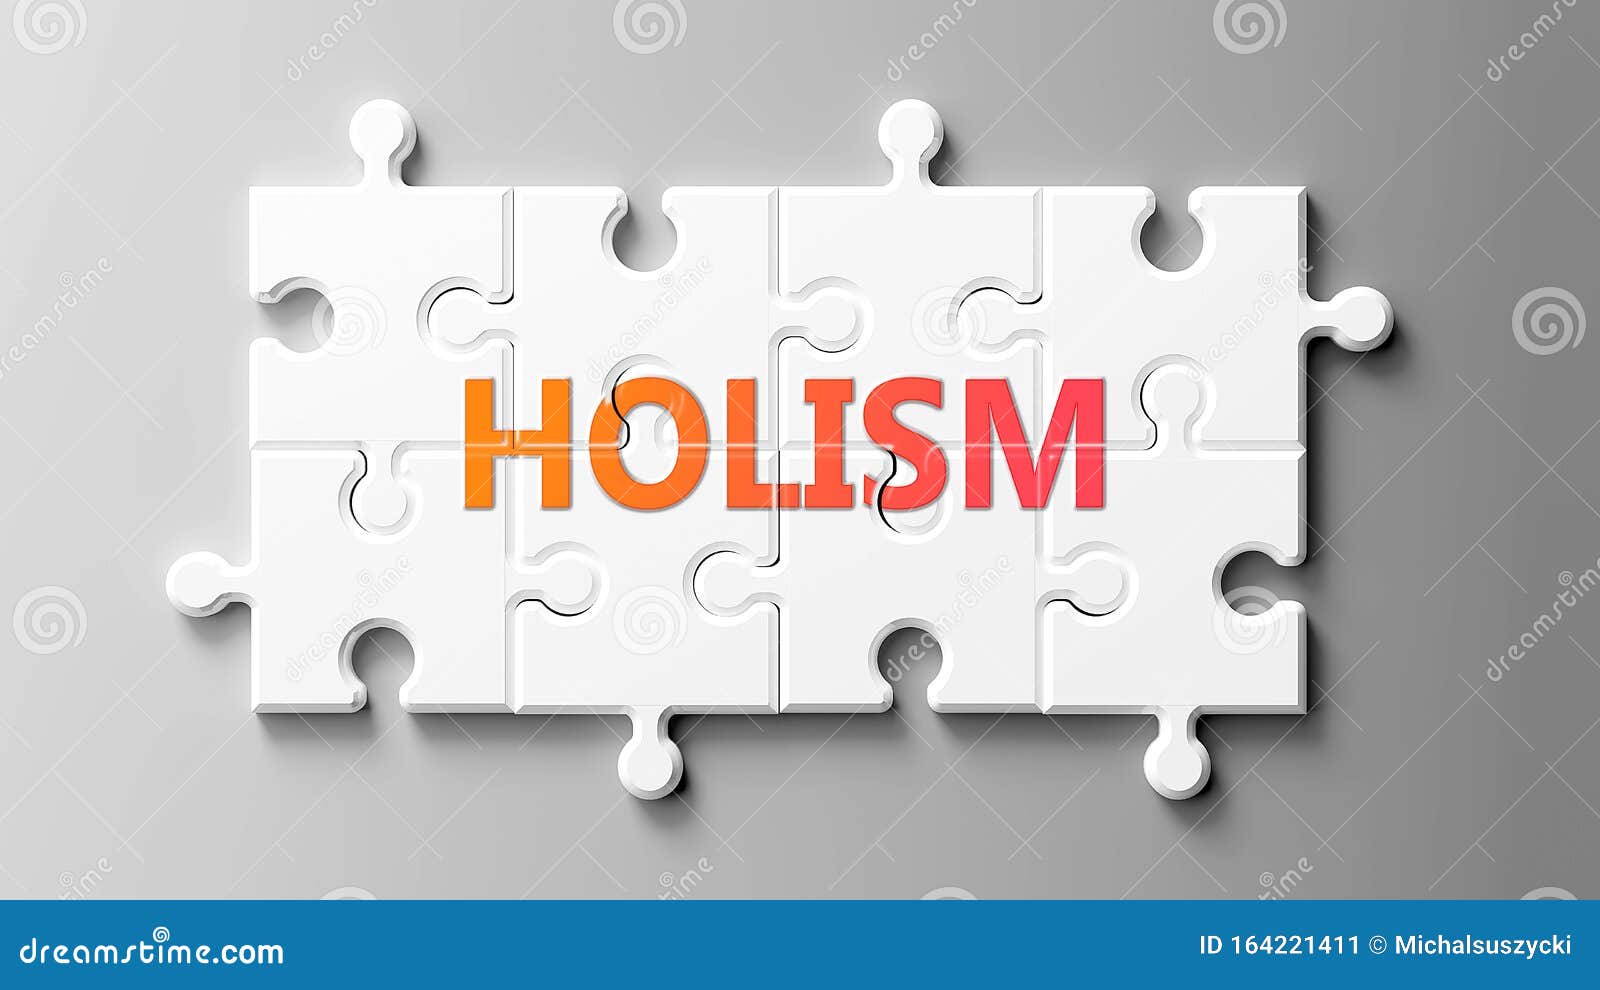 holism complex like a puzzle - pictured as word holism on a puzzle pieces to show that holism can be difficult and needs